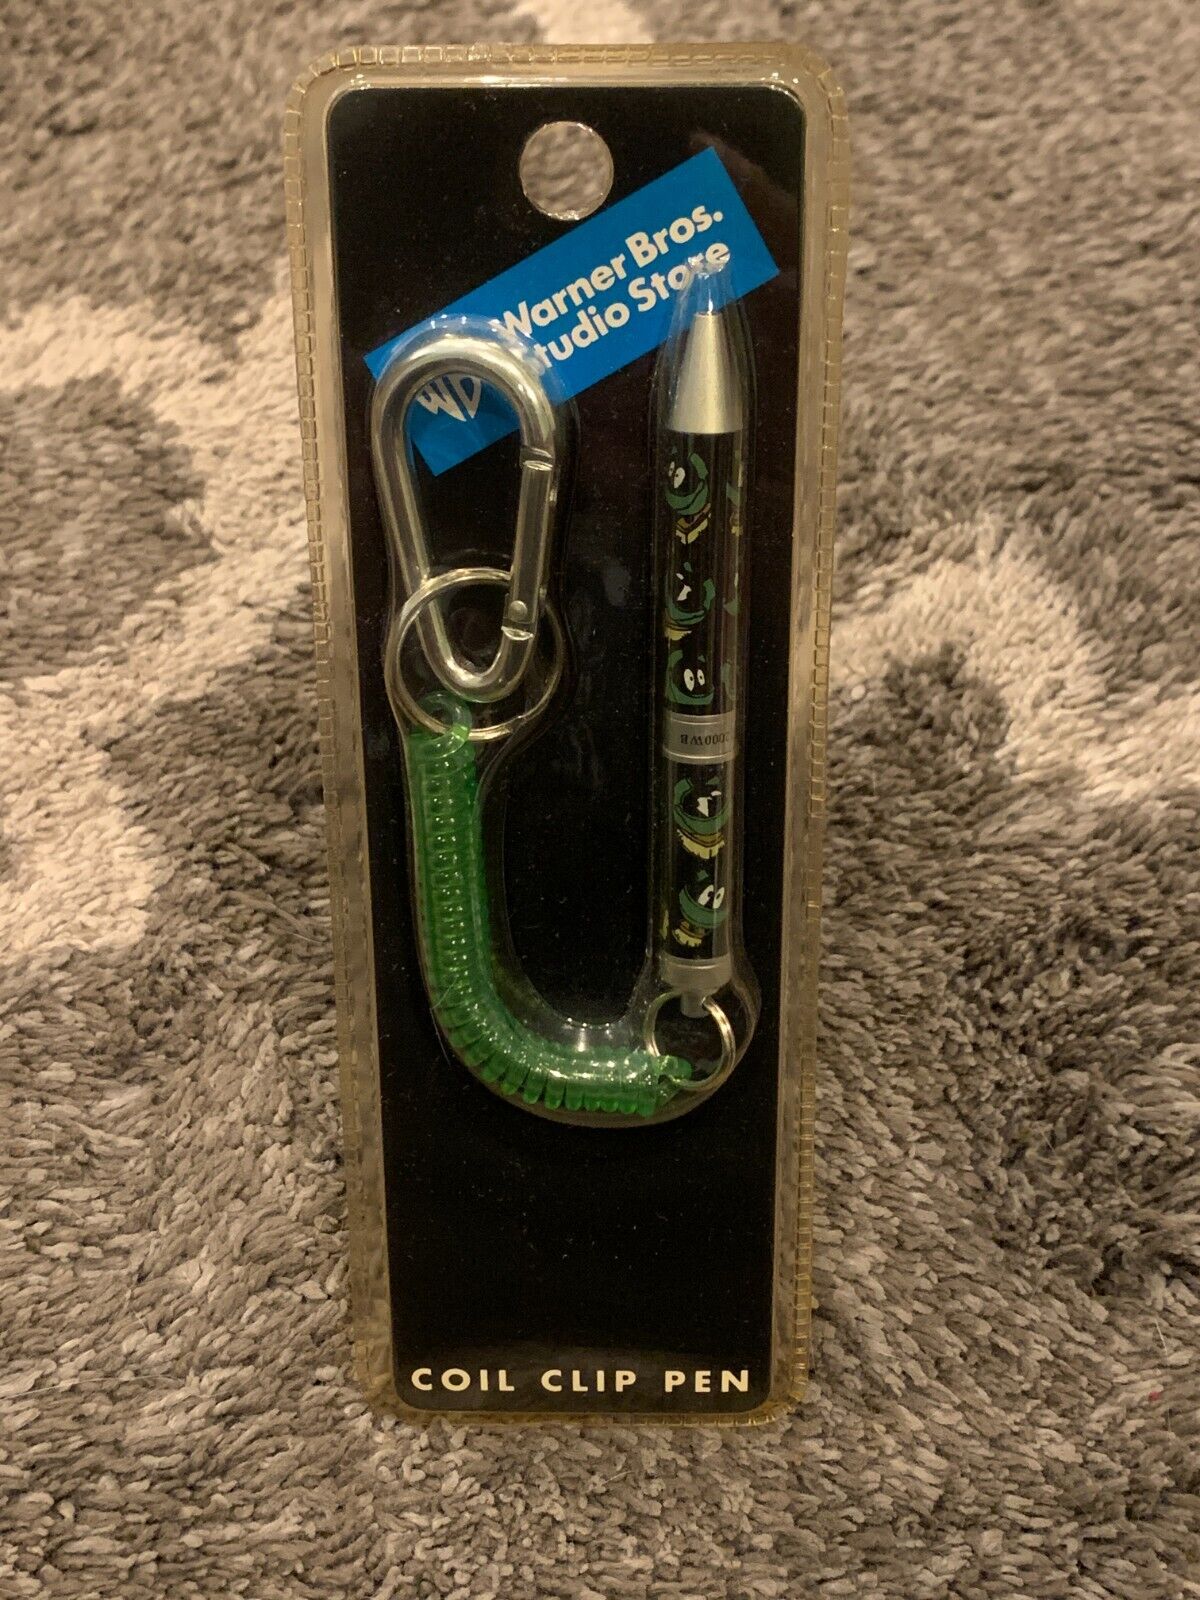 Marvin the Martian - Coil Clip Pen.  New in package.  43122 0296 001